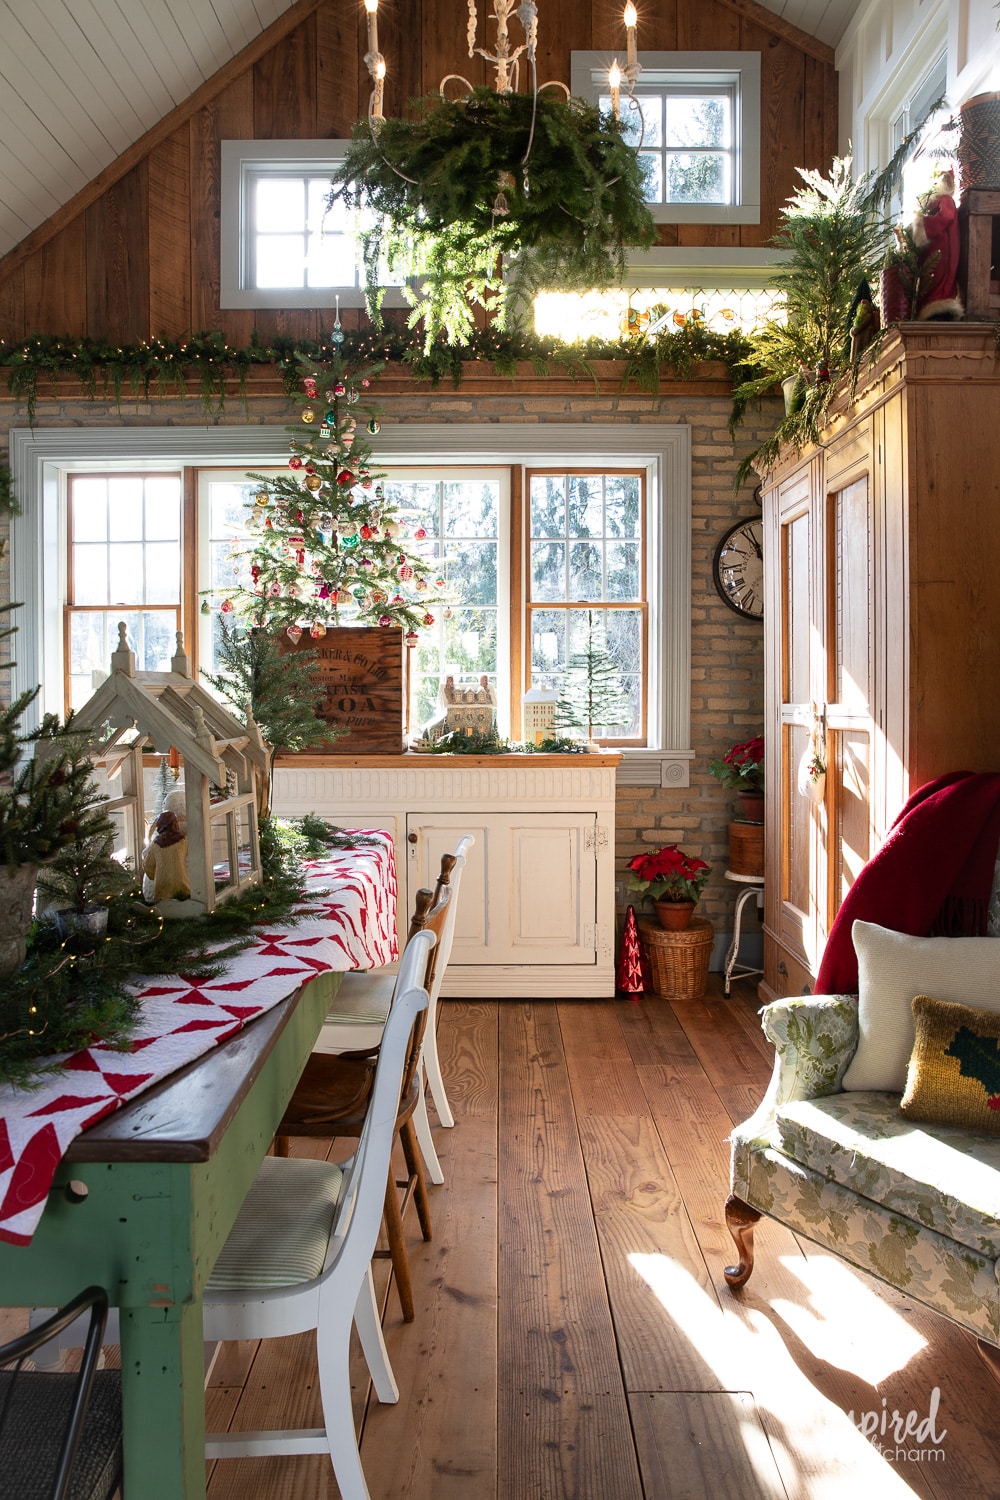 looking into the garden shed with festive decor.